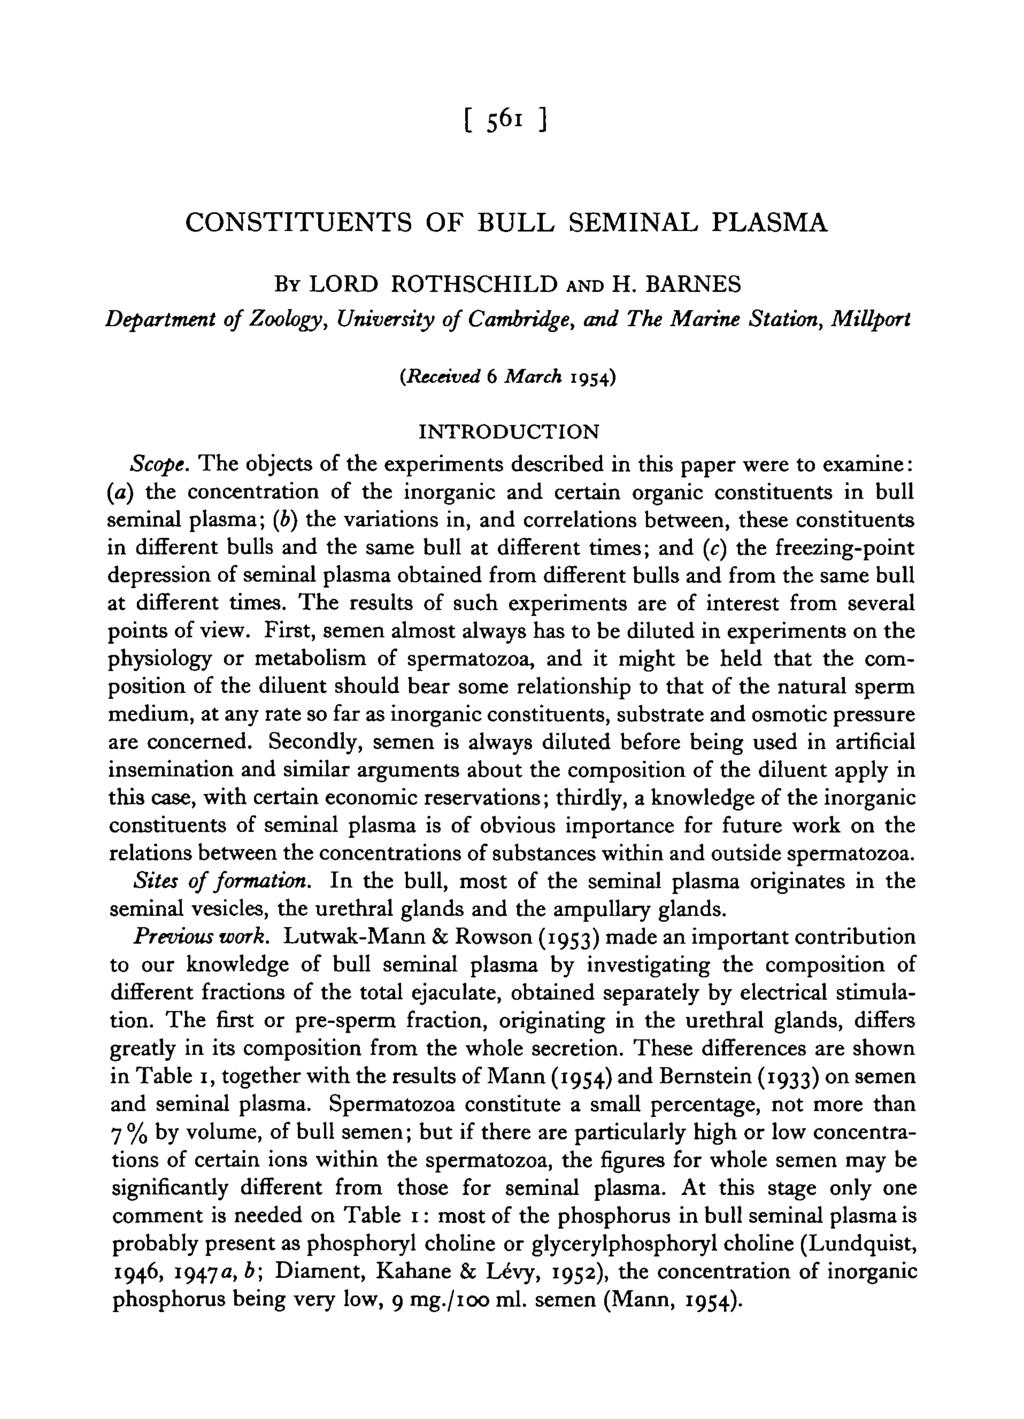 [56 CONSTITUENTS OF BULL SEMINAL PLASMA BY LORD ROTHSCHILD AND H. BARNES Department of Zoology, University of Cambridge, and The Marine Station, Millport (Received 6 March 95) INTRODUCTION Scope.